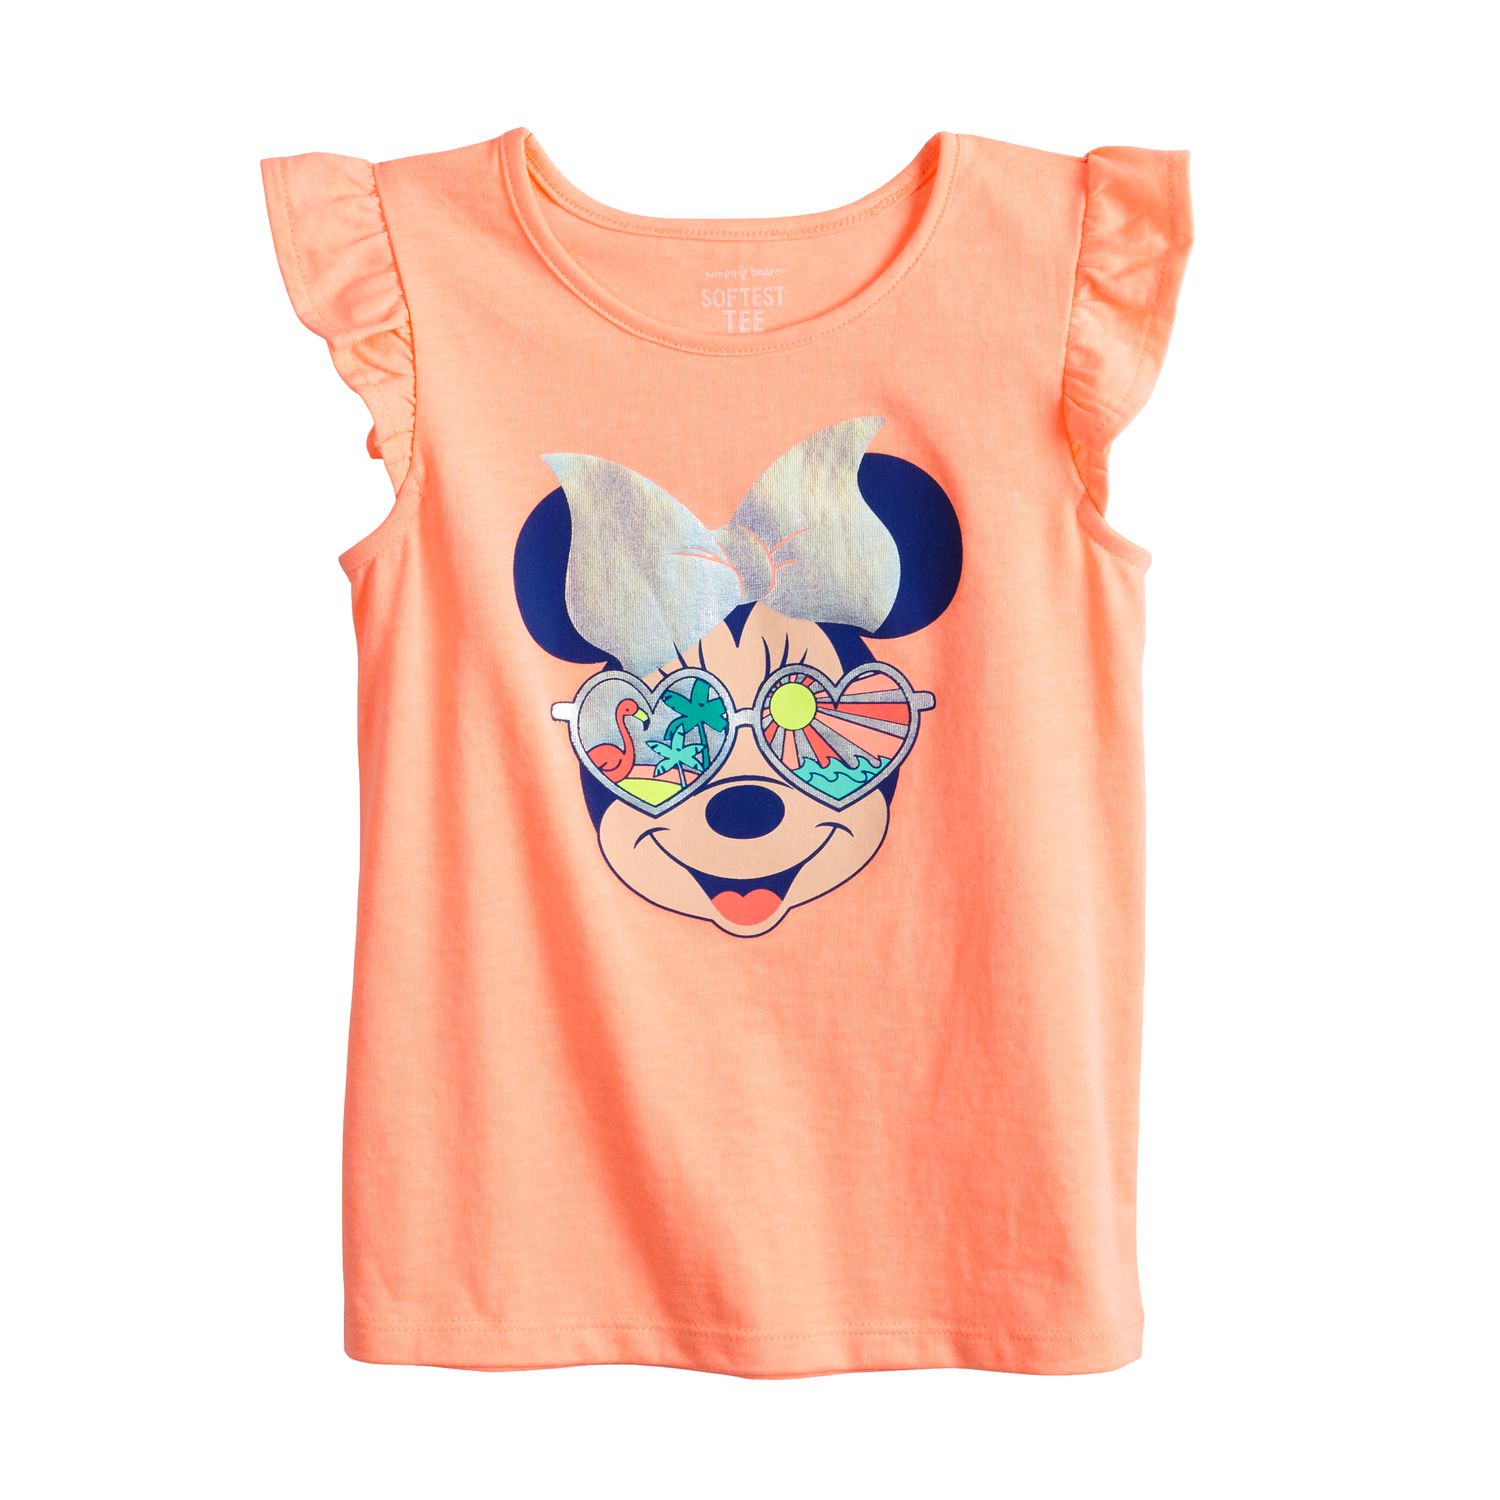 Image for Disney/Jumping Beans Disney's Minnie Mouse Toddler Girl Graphic Top by Jumping Beans® at Kohl's.